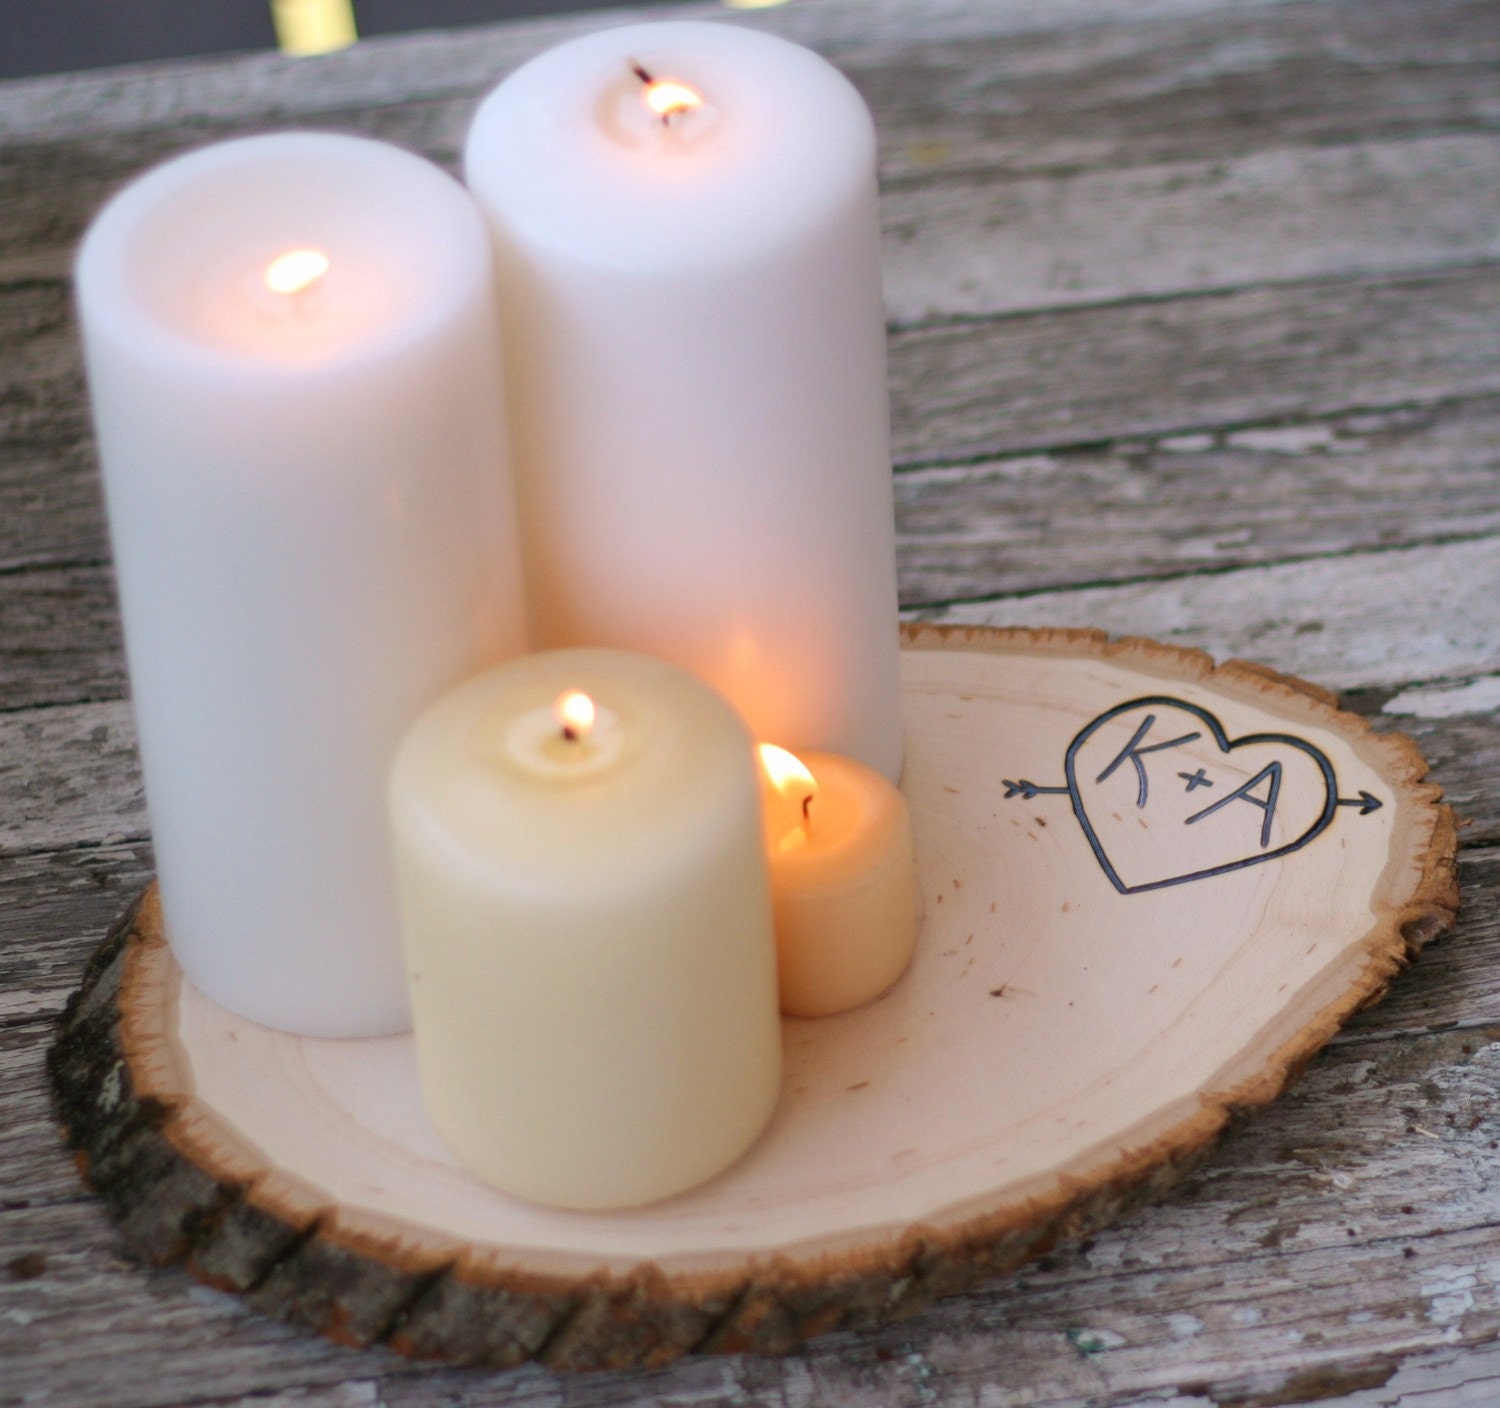  Engraved Heart and Arrow Wood Tree Slice Wedding Centerpiece Candle